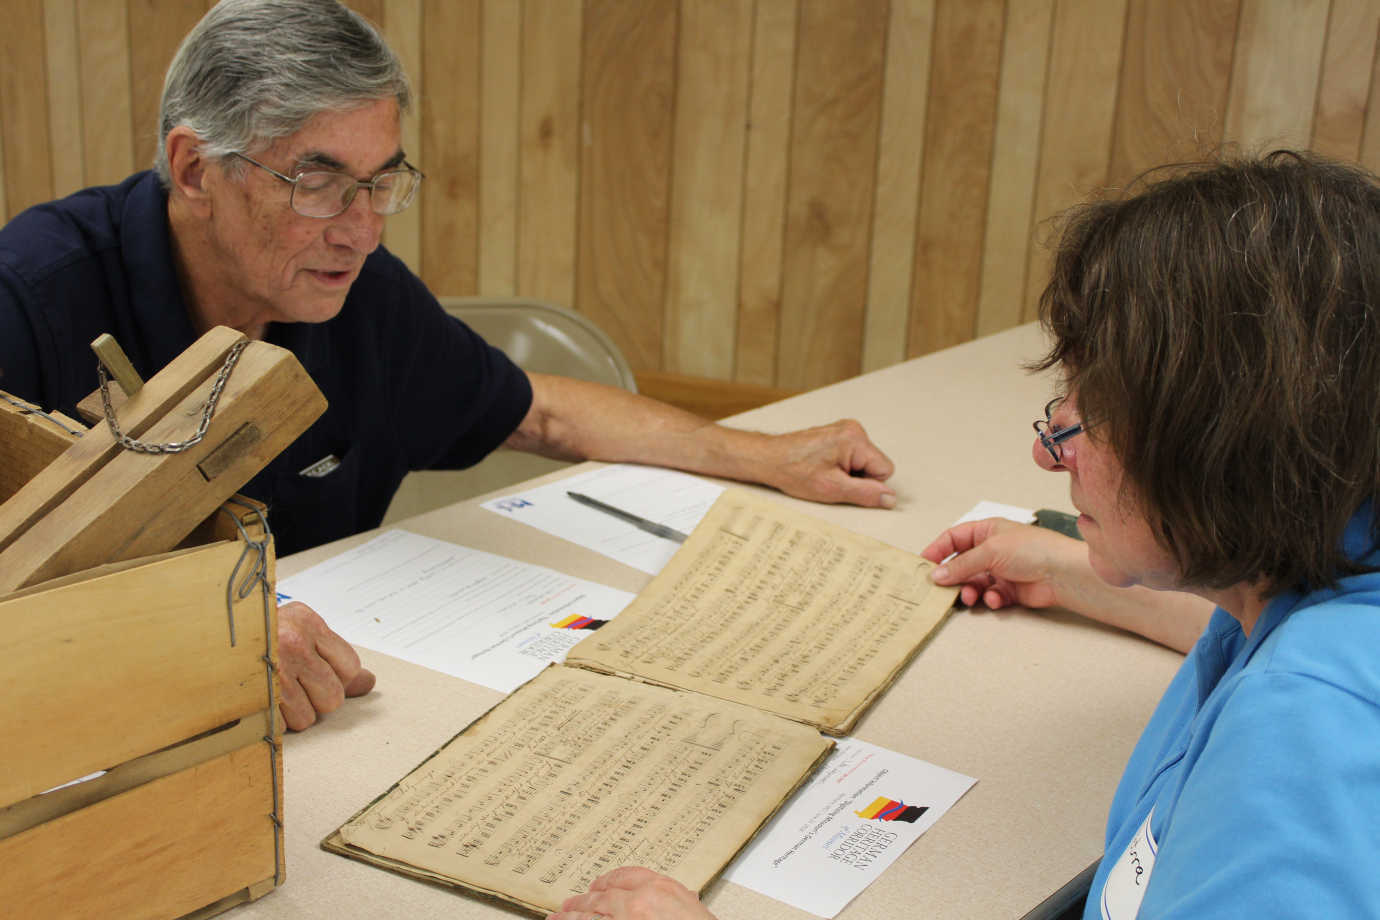 Petra DeWitt assists a participant with identifying and translating his items. Photo courtesy of Missouri Humanities.